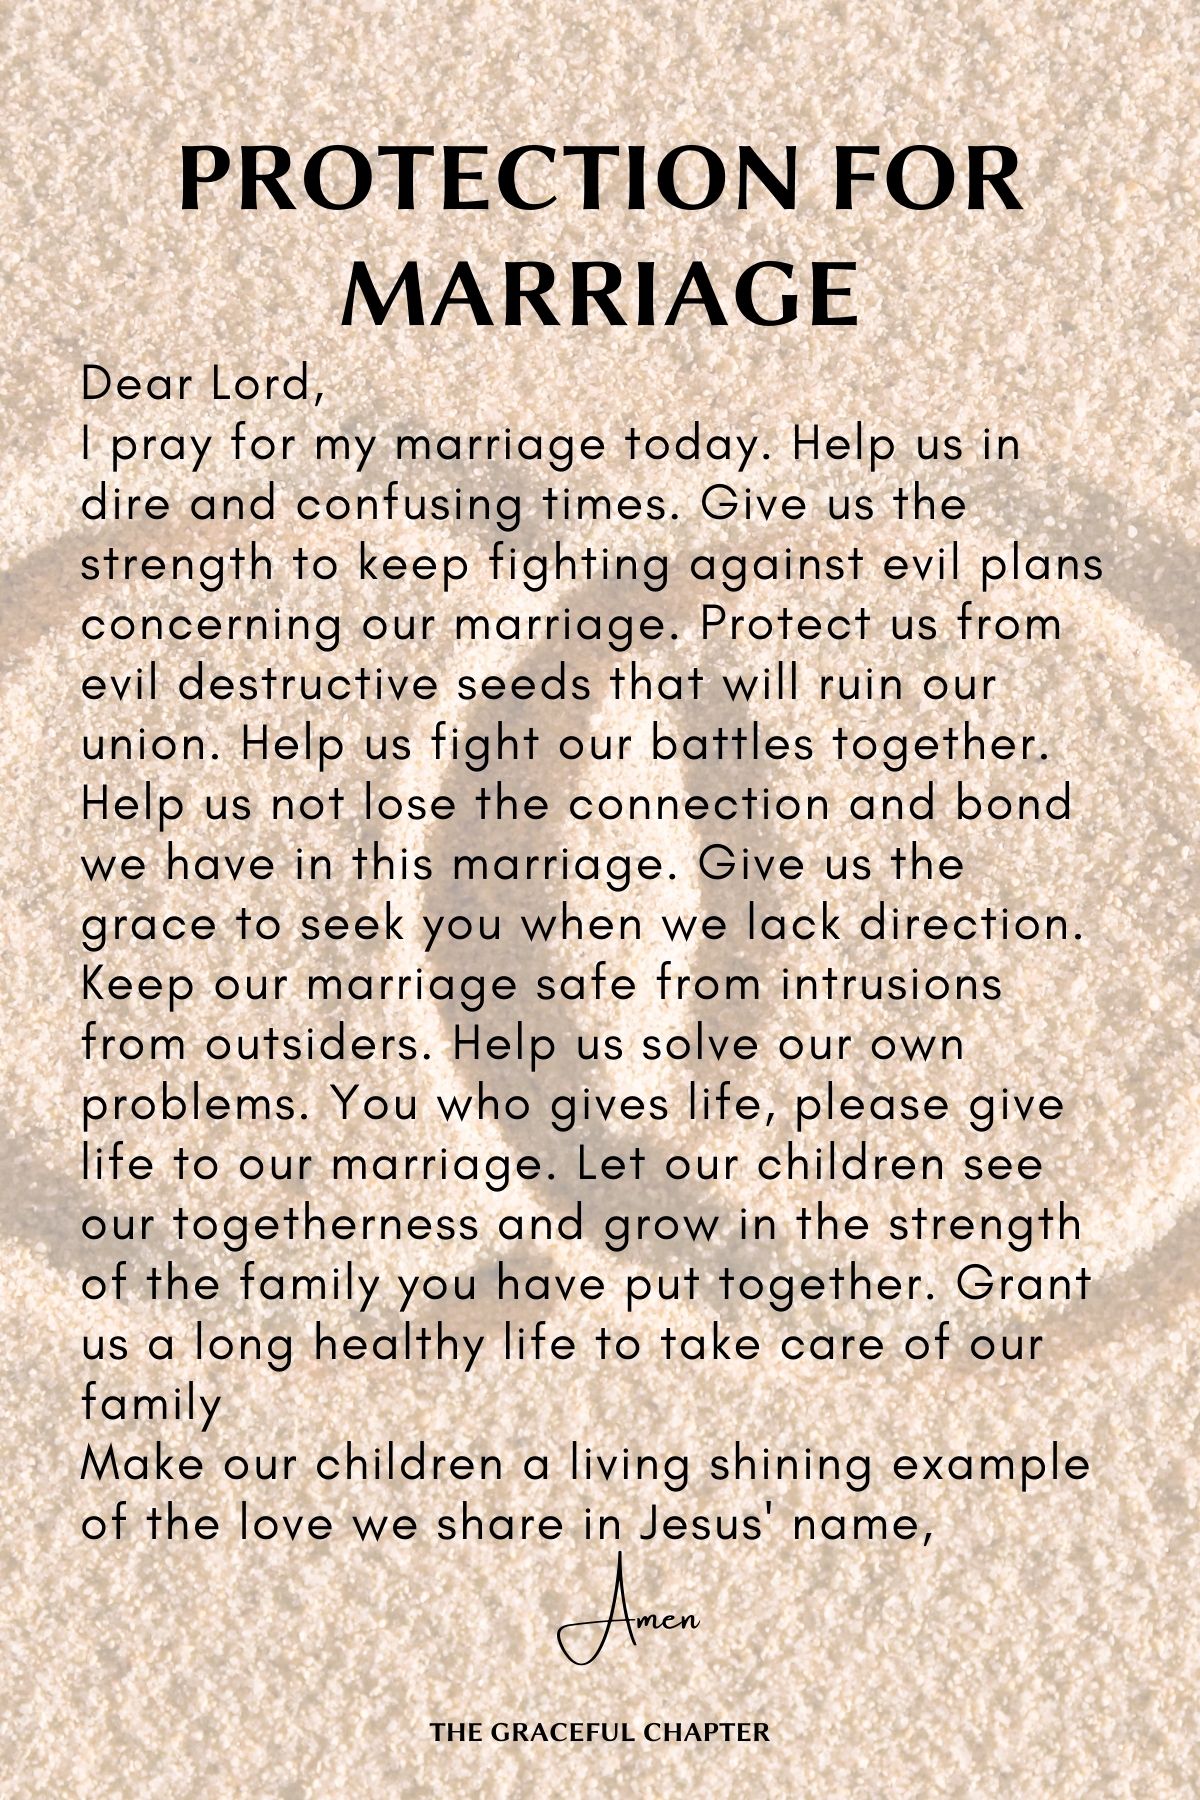 Prayers for Protection for marriage